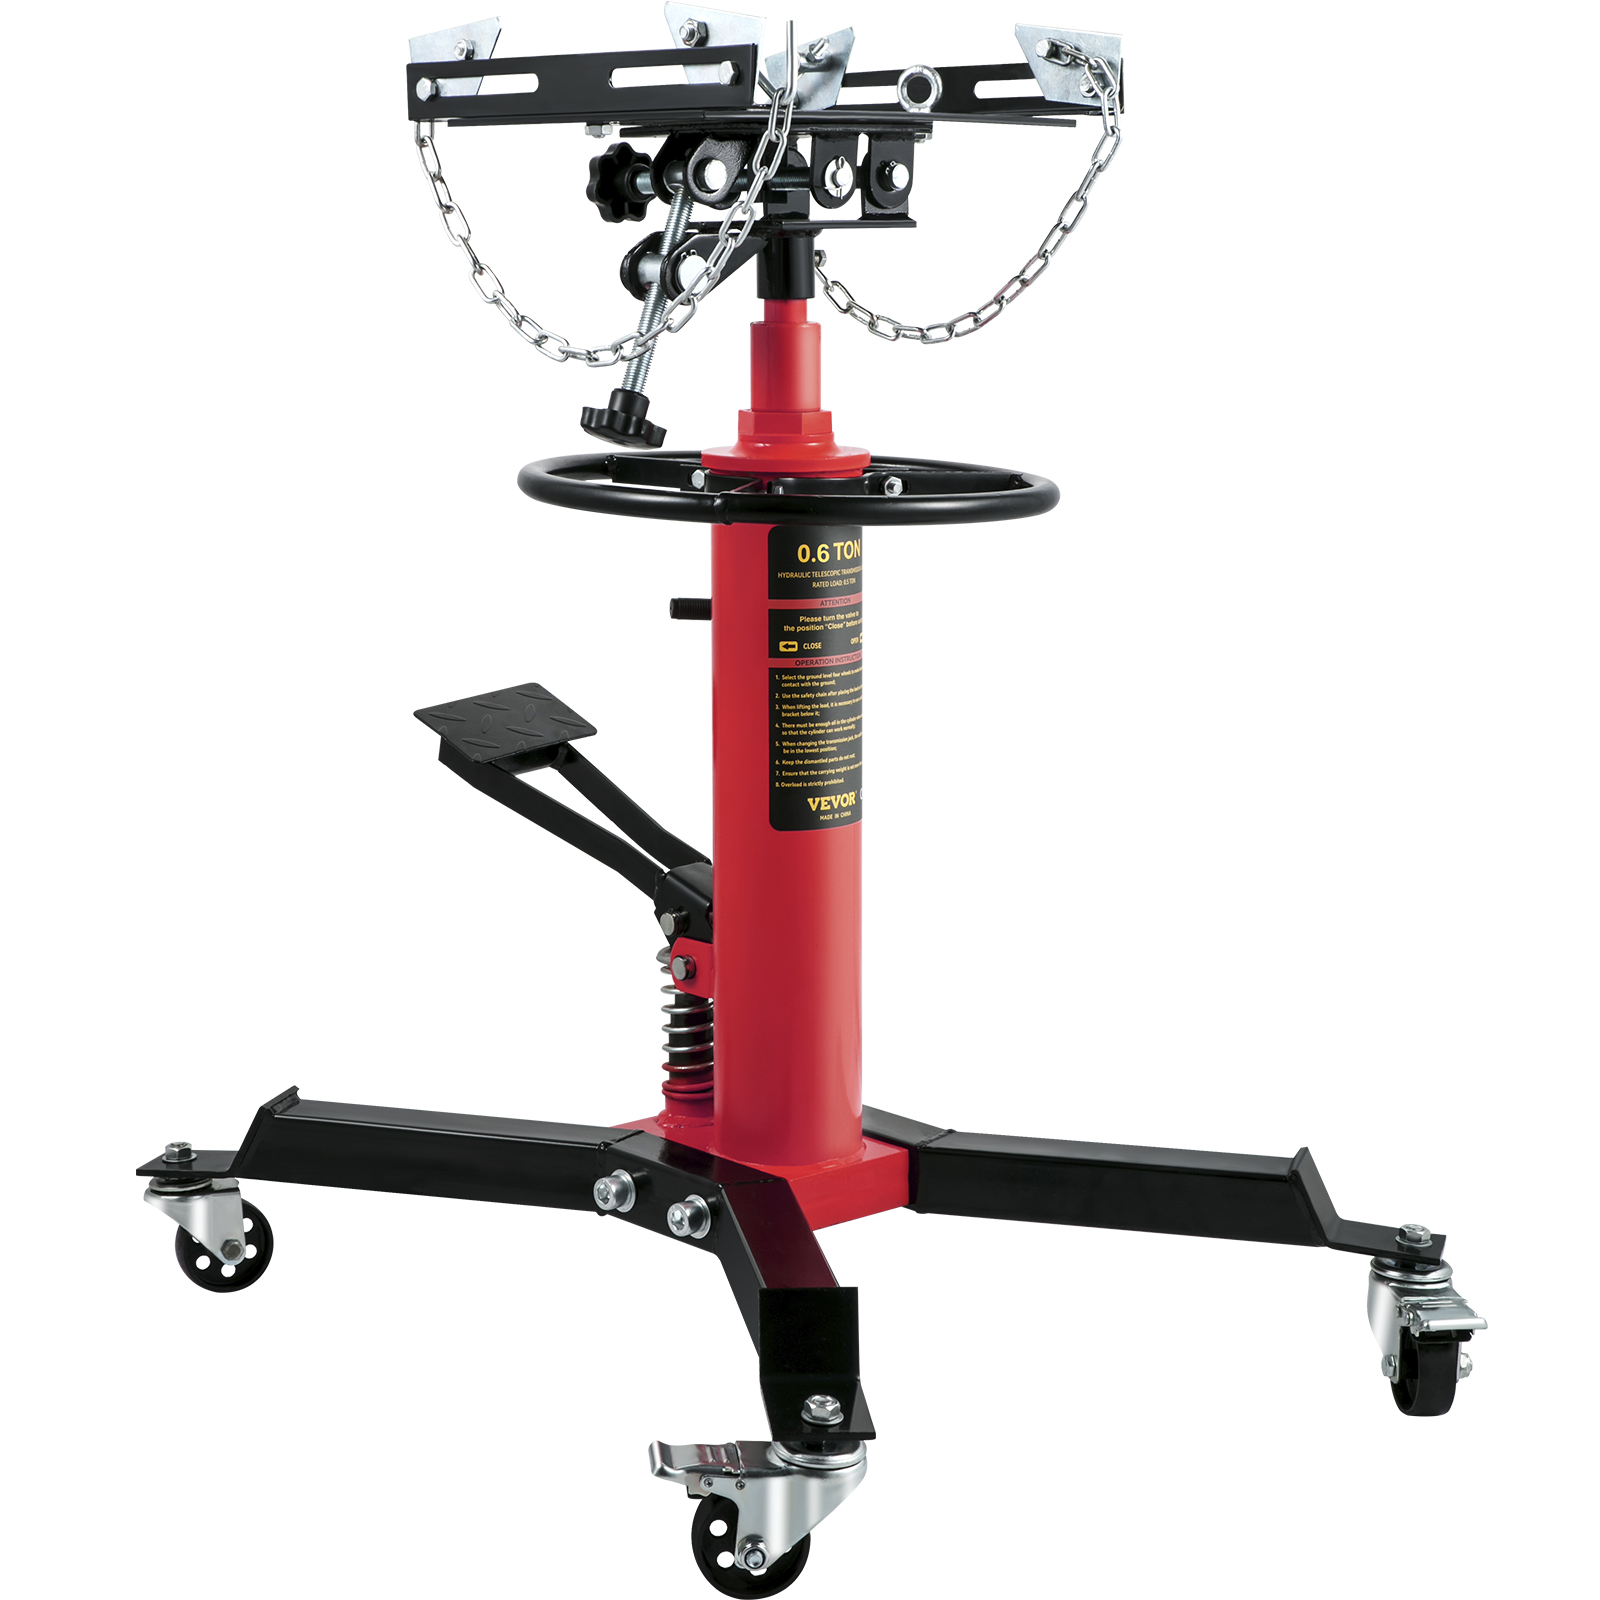 VEVOR Transmission Jack,3/5 Ton/1322 lbs Capacity Hydraulic Telescopic Transmission Jack, 2-Stage Floor Jack Stand with Foot Pedal, 360° Swivel